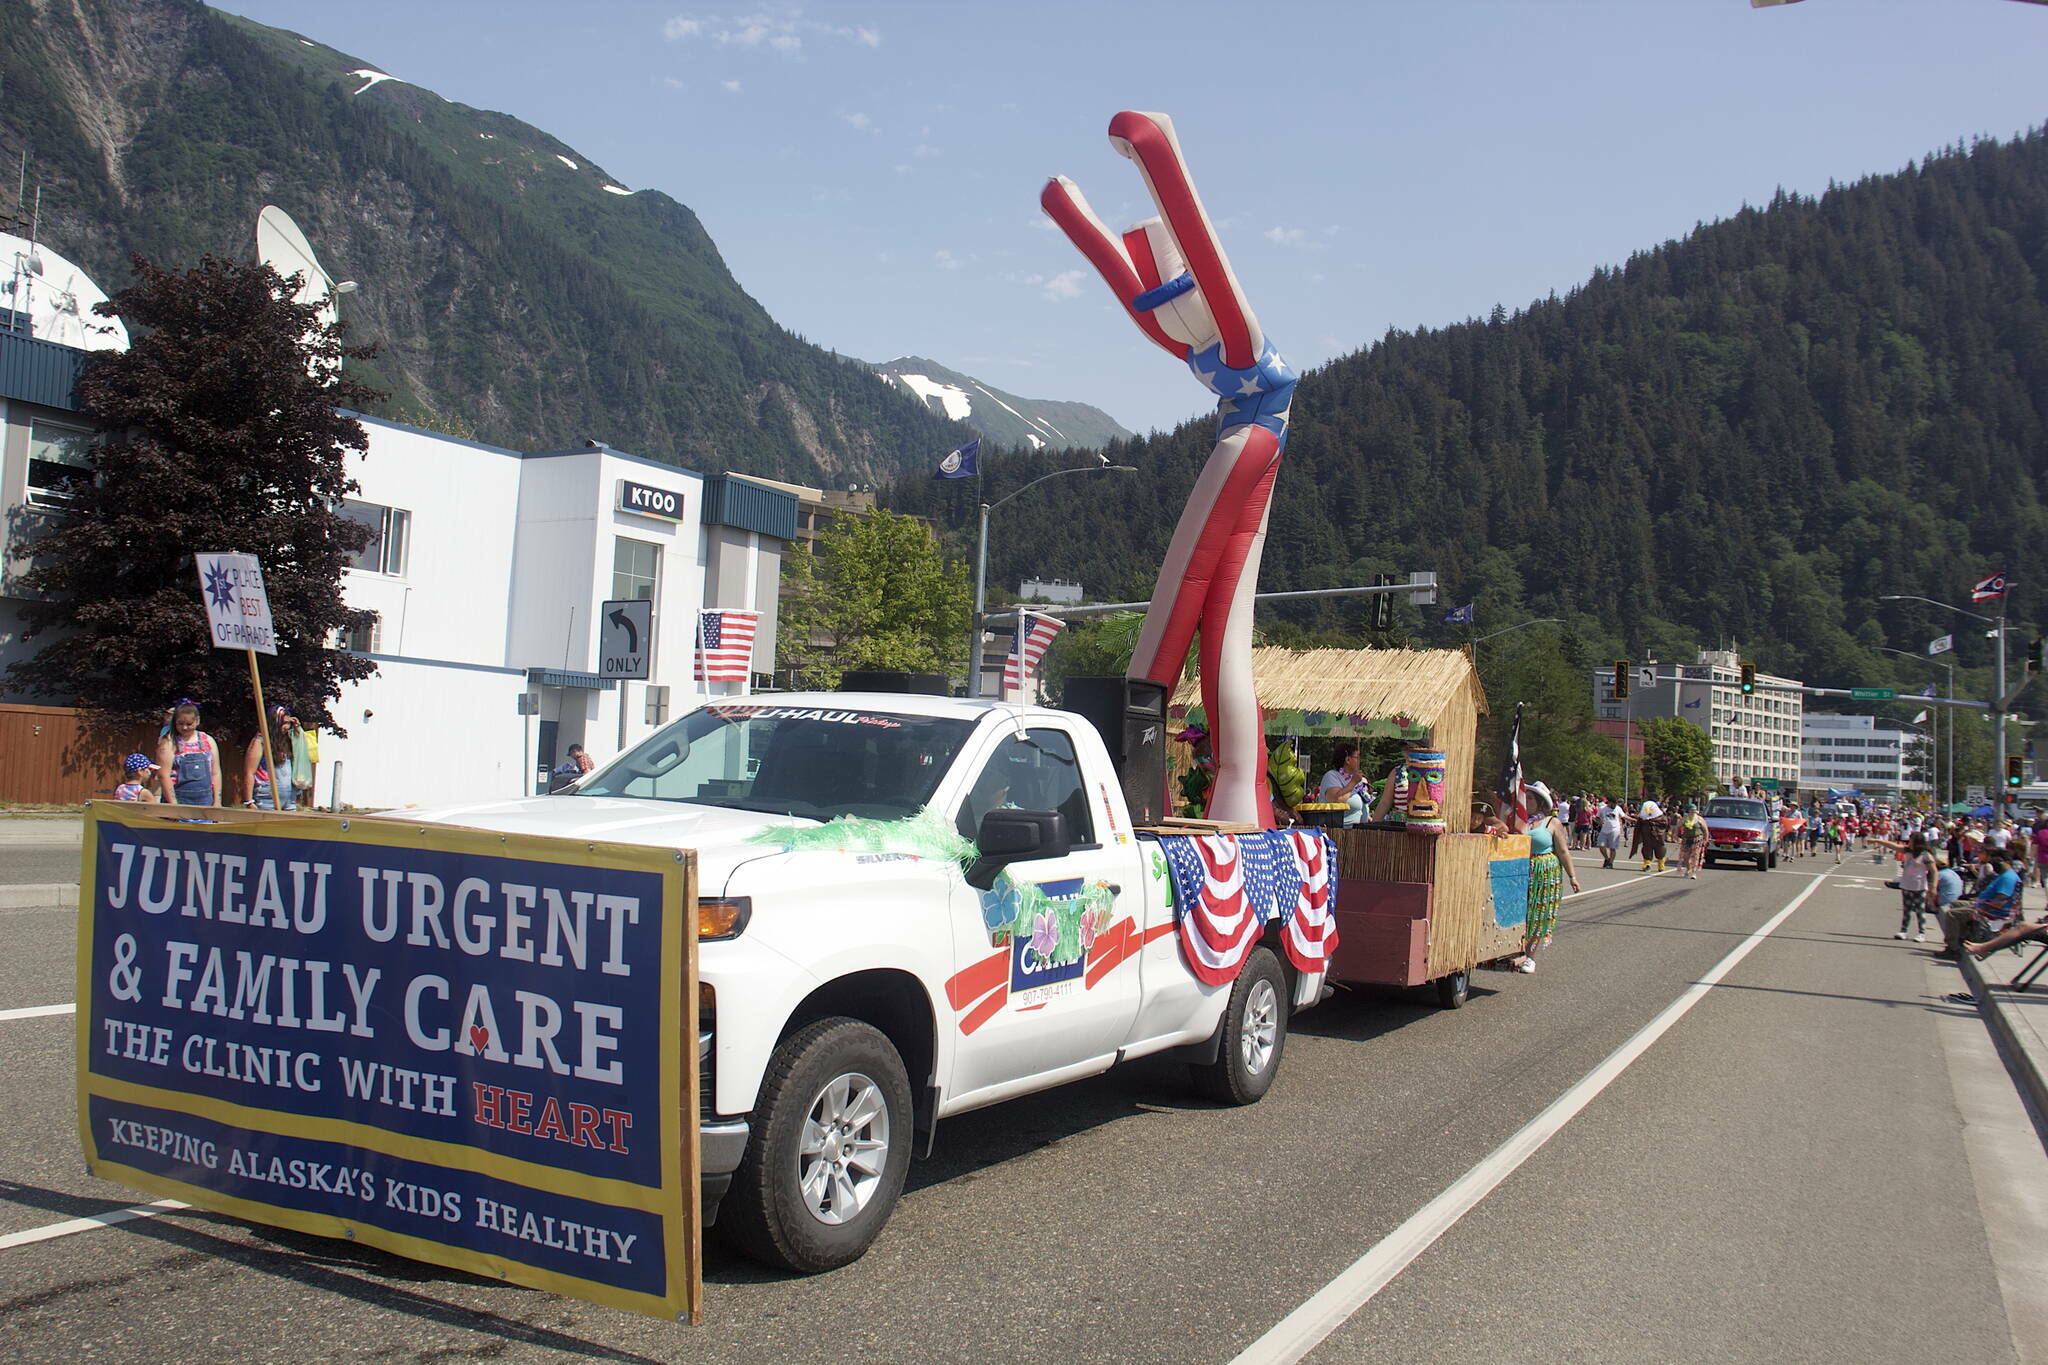 Mark Sabbatini / Juneau Empire File
A towering inflatable Uncle Sam “waves” to the crowd from the Hawaiian-themed Juneau Urgent Care float that won the Best of Parade award in the 2022 downtown July 4 parade.